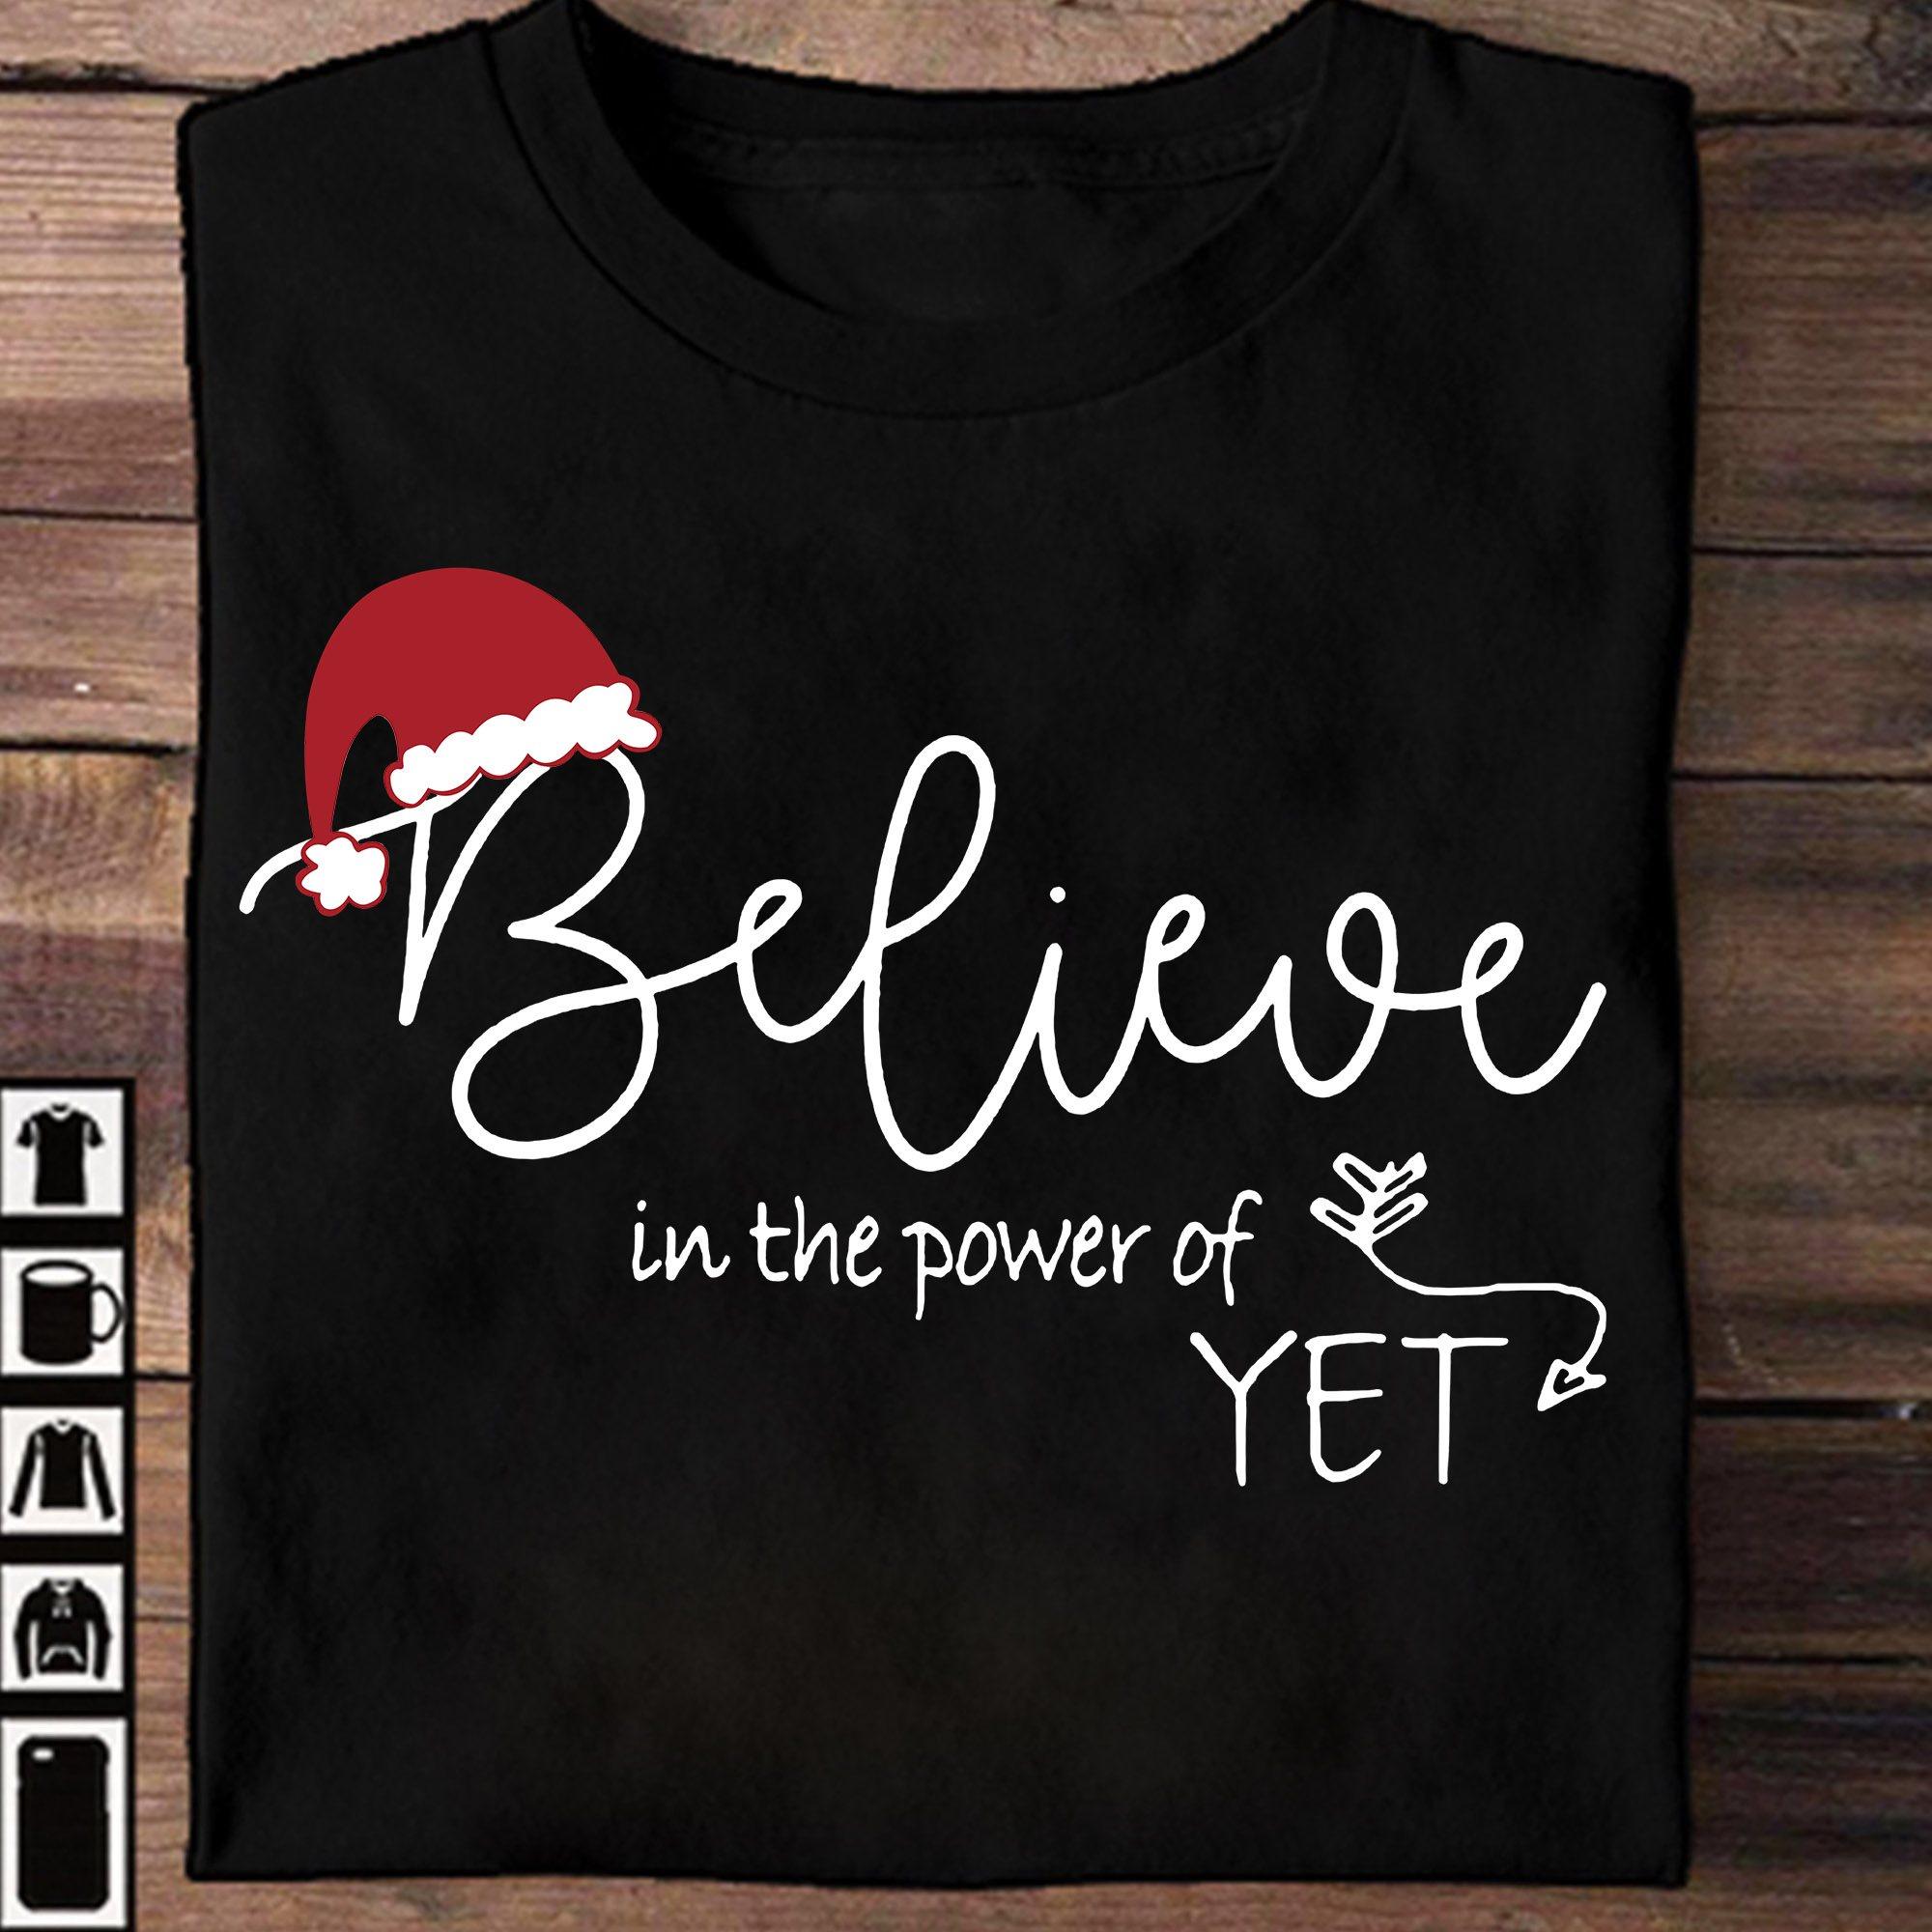 Believe in the power of Yet - Santa Claus hat, Christmas day ugly sweater